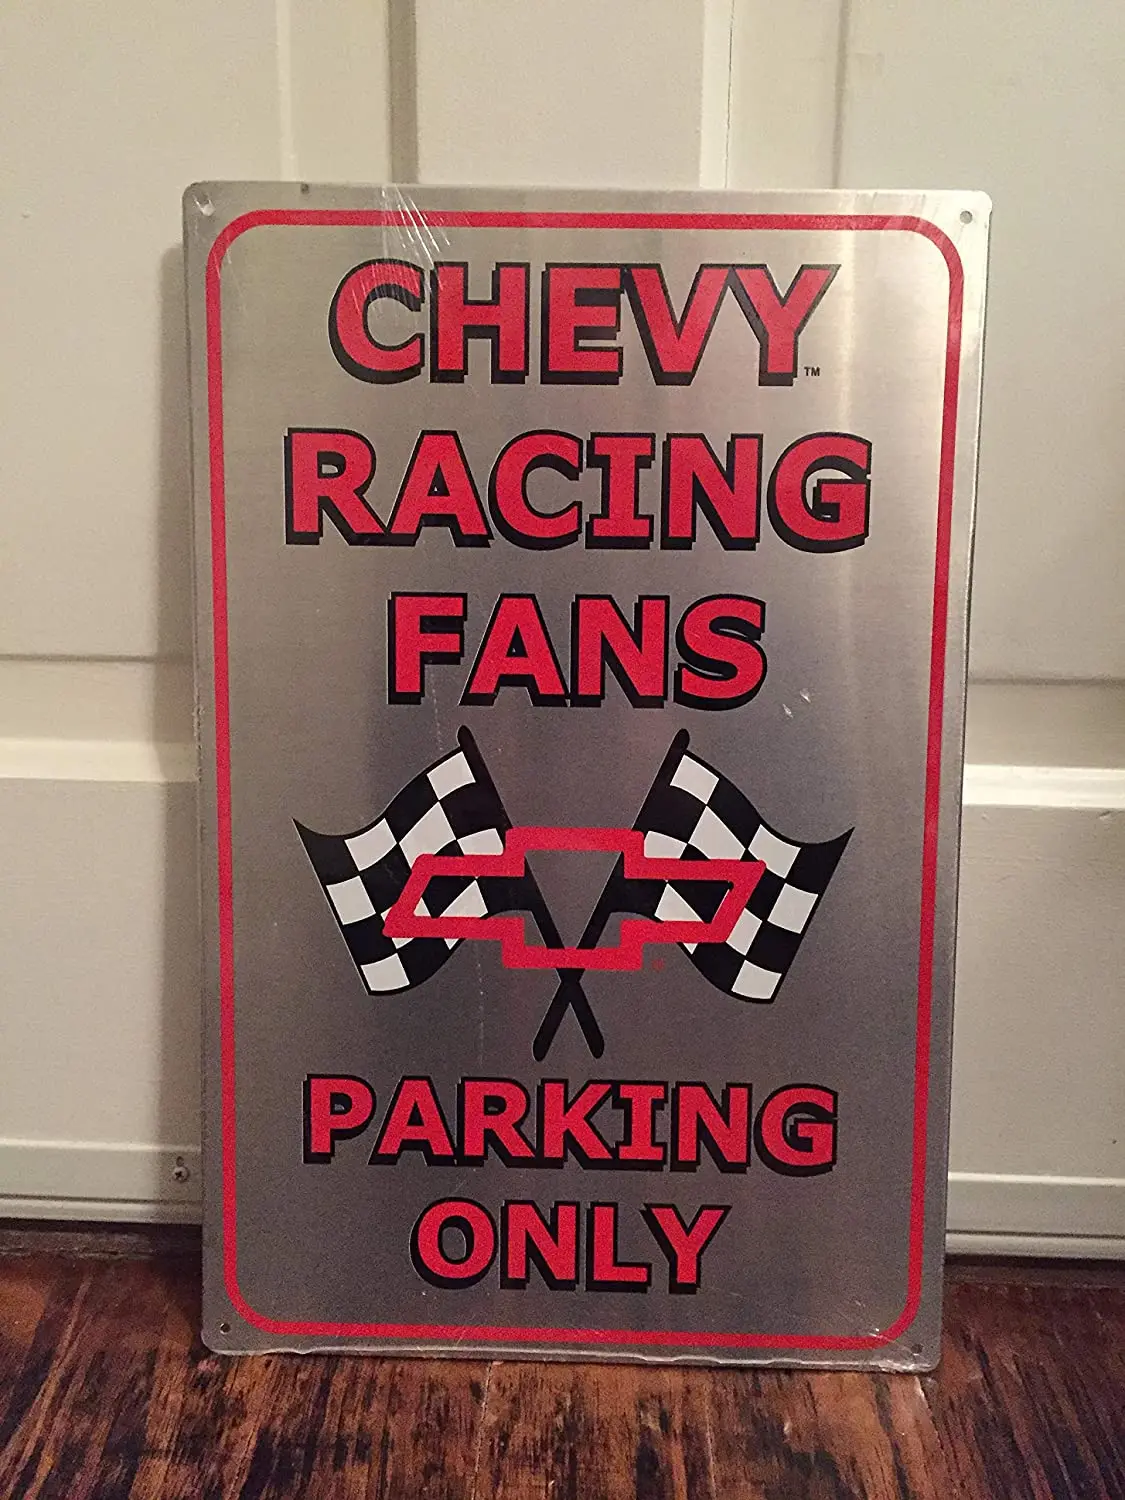 

Diuangfoong Chevy Racing Fans Vintage Reproduction Metal Sign 12" x 8"